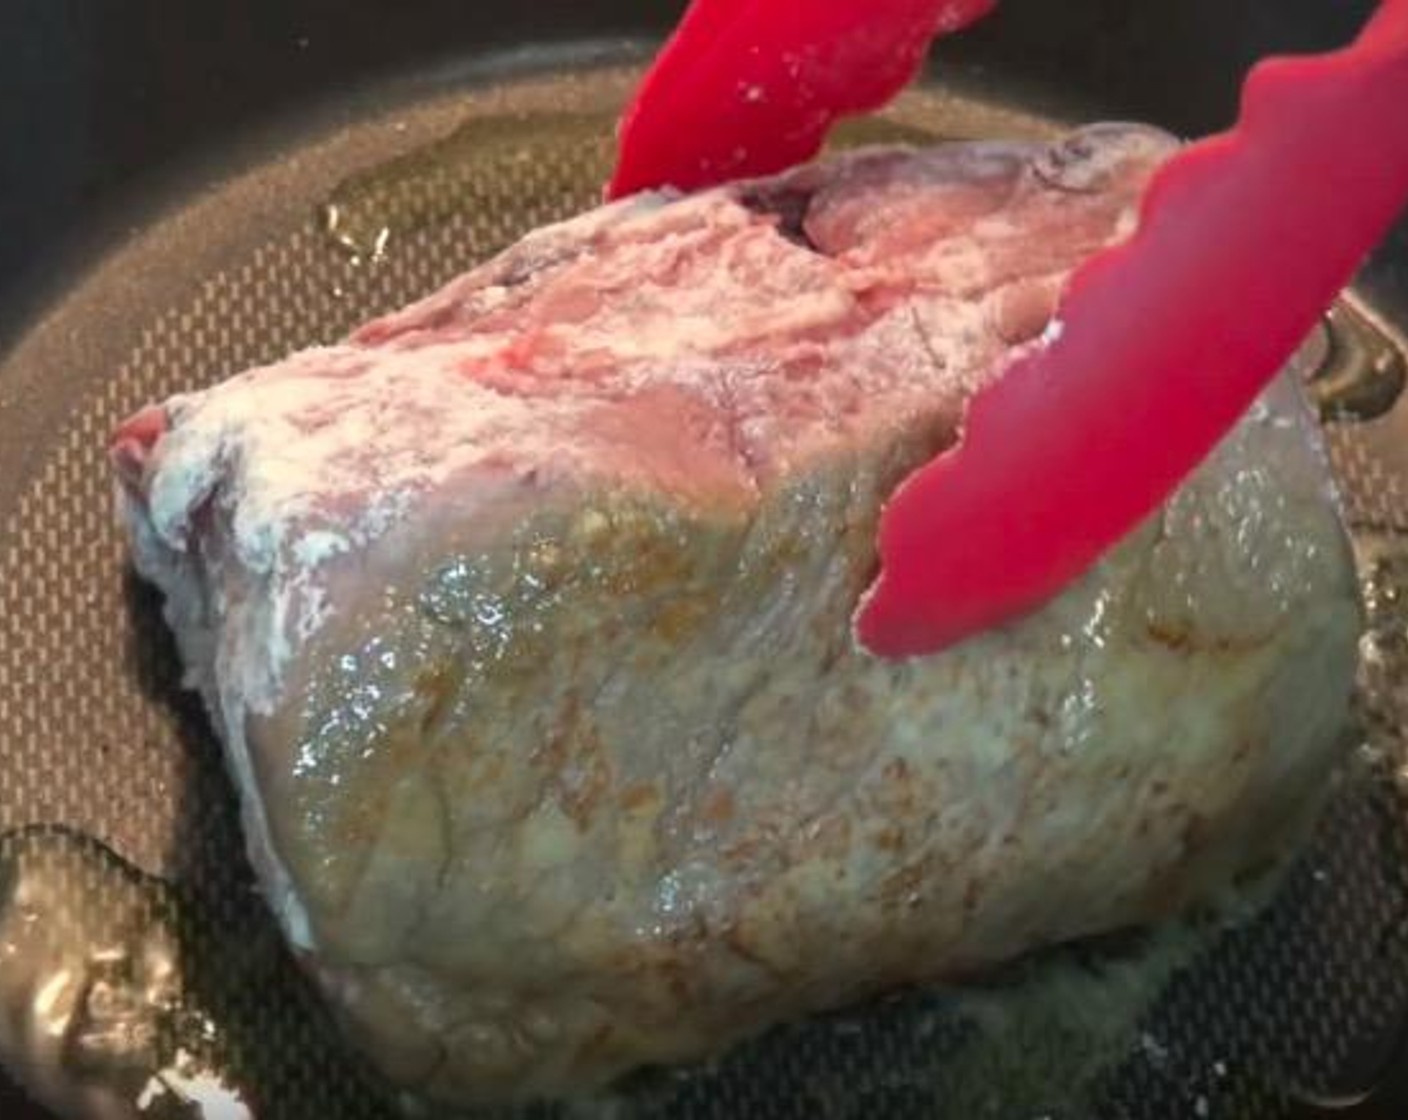 step 2 In a fry pan over medium-high heat, add Olive Oil (1 splash). When pan is hot, sear each side of the beef roast.